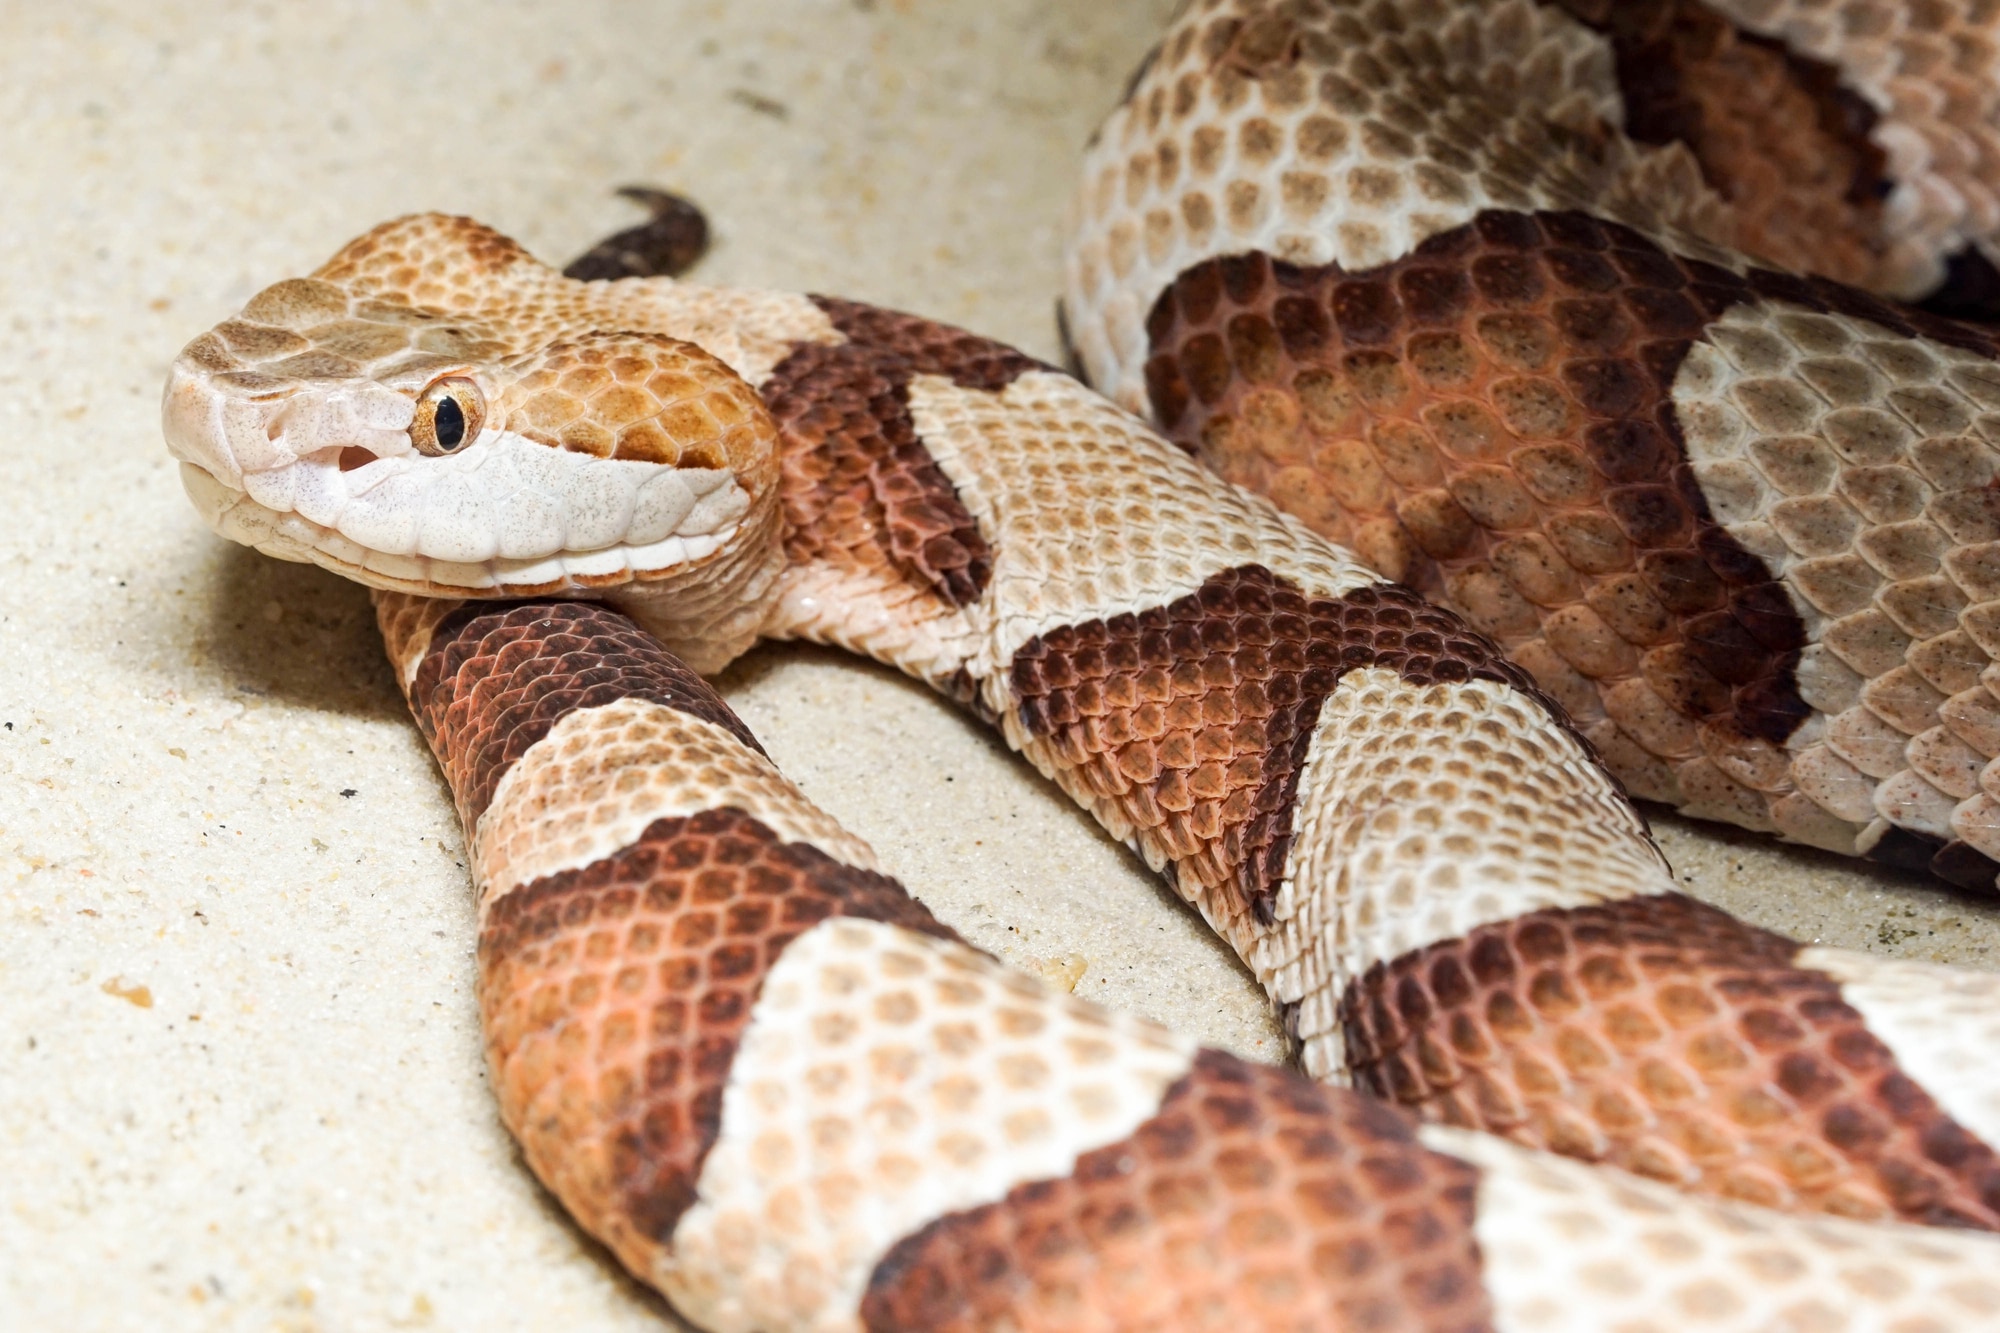 Close up view of a Copperhead Snake.